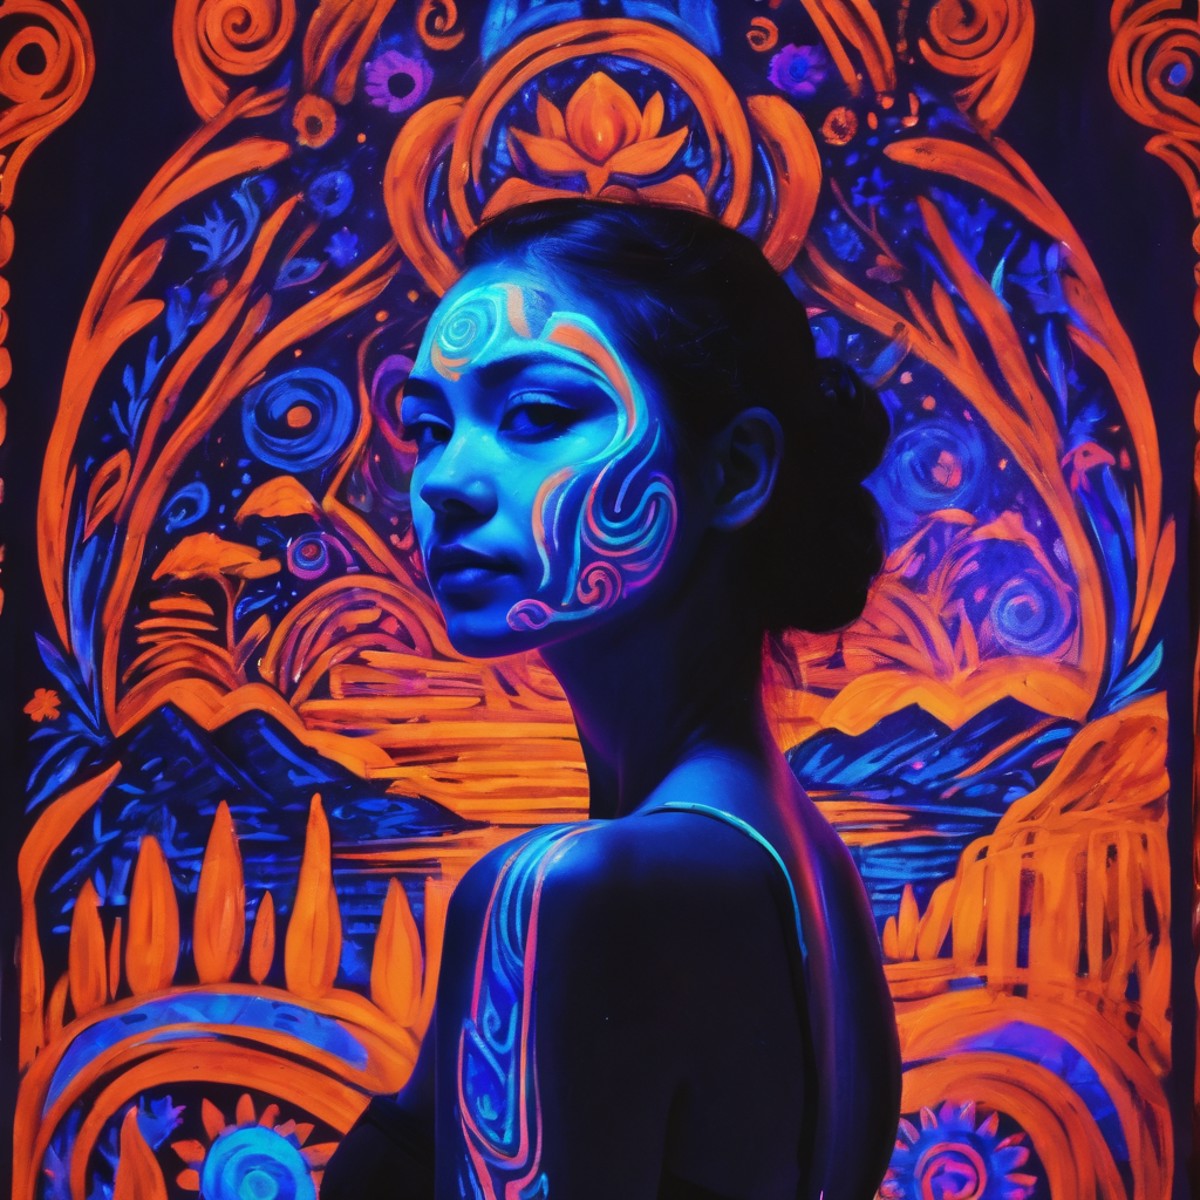 blacklight uv painted on the back of a girl depicting art in the style of diego rivera